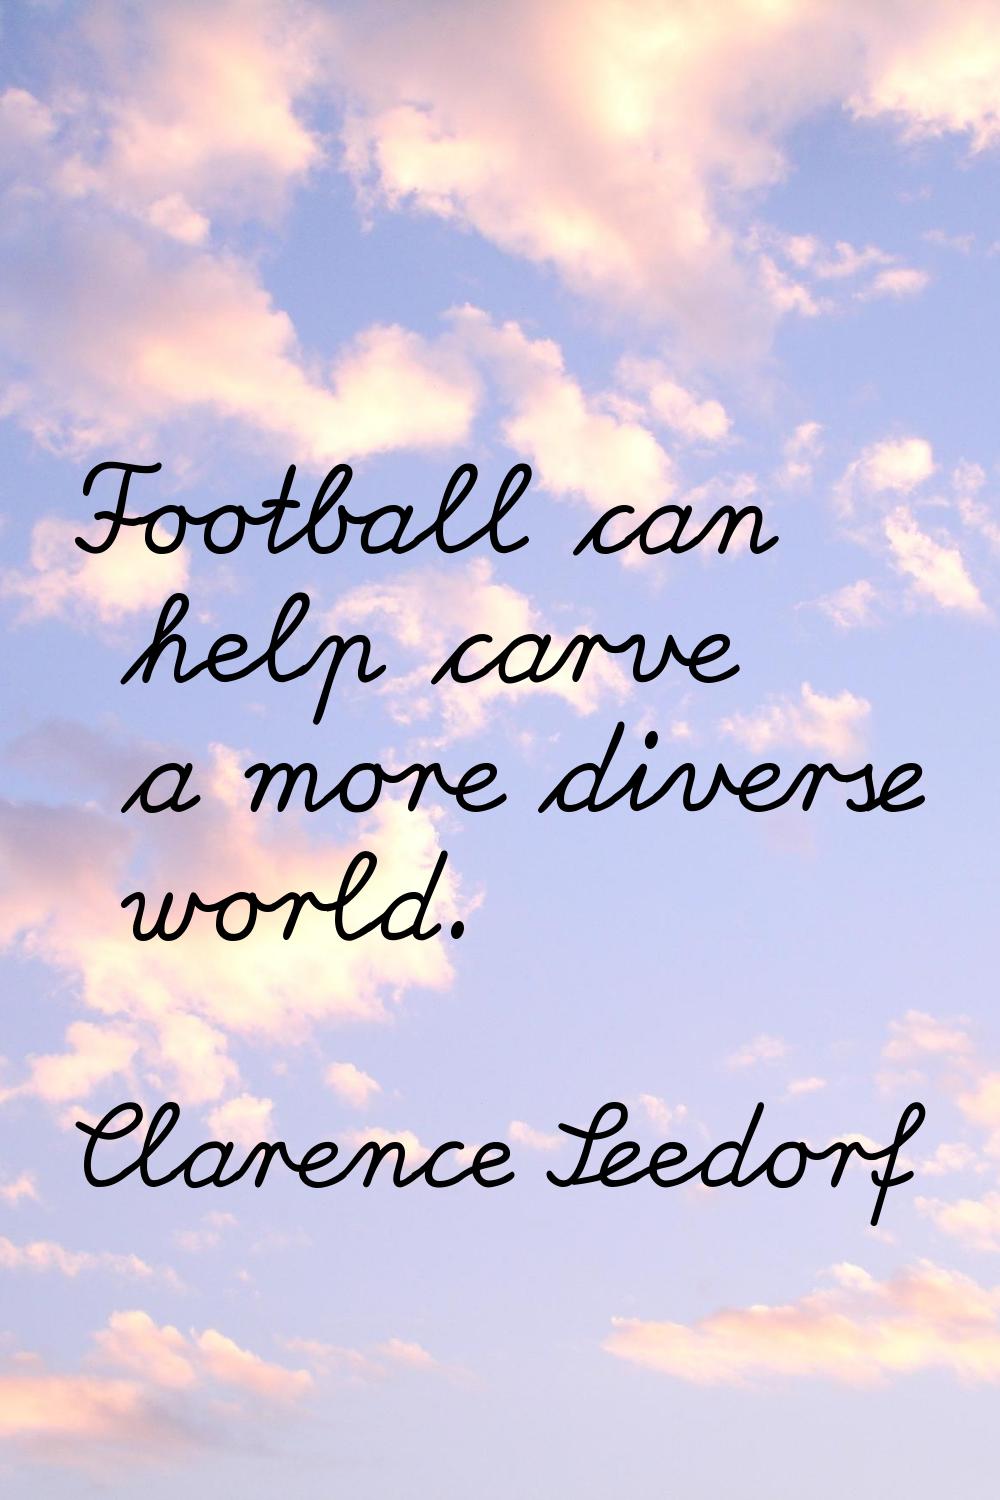 Football can help carve a more diverse world.